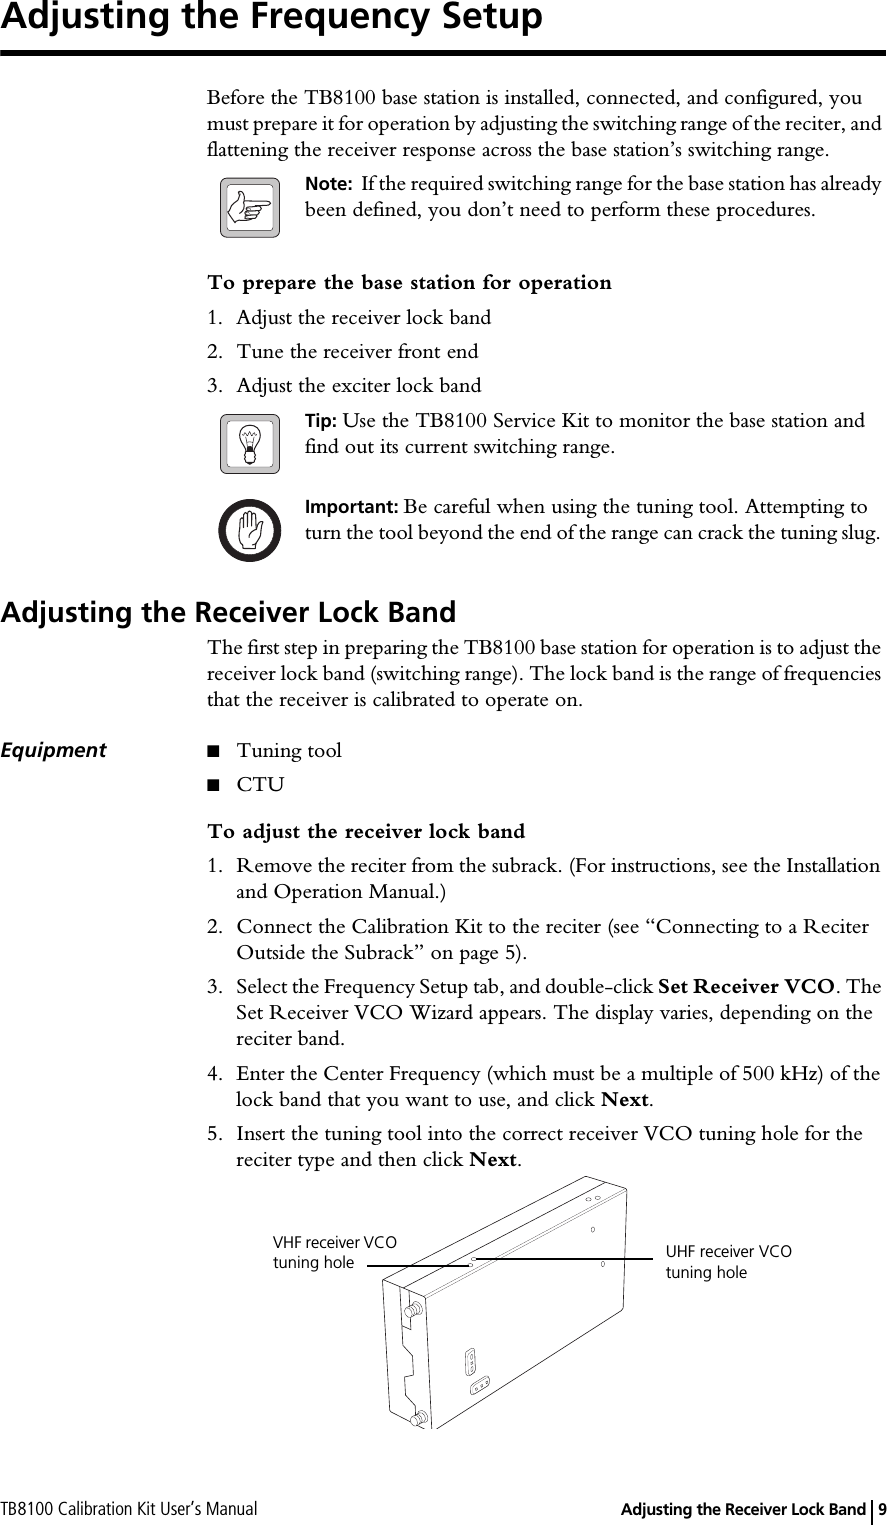 TB8100 Calibration Kit User’s Manual   Adjusting the Receiver Lock Band 9Adjusting the Frequency SetupBefore the TB8100 base station is installed, connected, and configured, you must prepare it for operation by adjusting the switching range of the reciter, and flattening the receiver response across the base station’s switching range.Note:  If the required switching range for the base station has already been defined, you don’t need to perform these procedures.To prepare the base station for operation1. Adjust the receiver lock band2. Tune the receiver front end3. Adjust the exciter lock bandTip: Use the TB8100 Service Kit to monitor the base station and find out its current switching range.Important: Be careful when using the tuning tool. Attempting to turn the tool beyond the end of the range can crack the tuning slug. Adjusting the Receiver Lock BandThe first step in preparing the TB8100 base station for operation is to adjust the receiver lock band (switching range). The lock band is the range of frequencies that the receiver is calibrated to operate on.Equipment ■Tuning tool■CTUTo adjust the receiver lock band1. Remove the reciter from the subrack. (For instructions, see the Installation and Operation Manual.)2. Connect the Calibration Kit to the reciter (see “Connecting to a Reciter Outside the Subrack” on page 5).3. Select the Frequency Setup tab, and double-click Set Receiver VCO. The Set Receiver VCO Wizard appears. The display varies, depending on the reciter band.4. Enter the Center Frequency (which must be a multiple of 500 kHz) of the lock band that you want to use, and click Next.5. Insert the tuning tool into the correct receiver VCO tuning hole for the reciter type and then click Next.UHF receiver VCO tuning hole VHF receiver VCO tuning hole